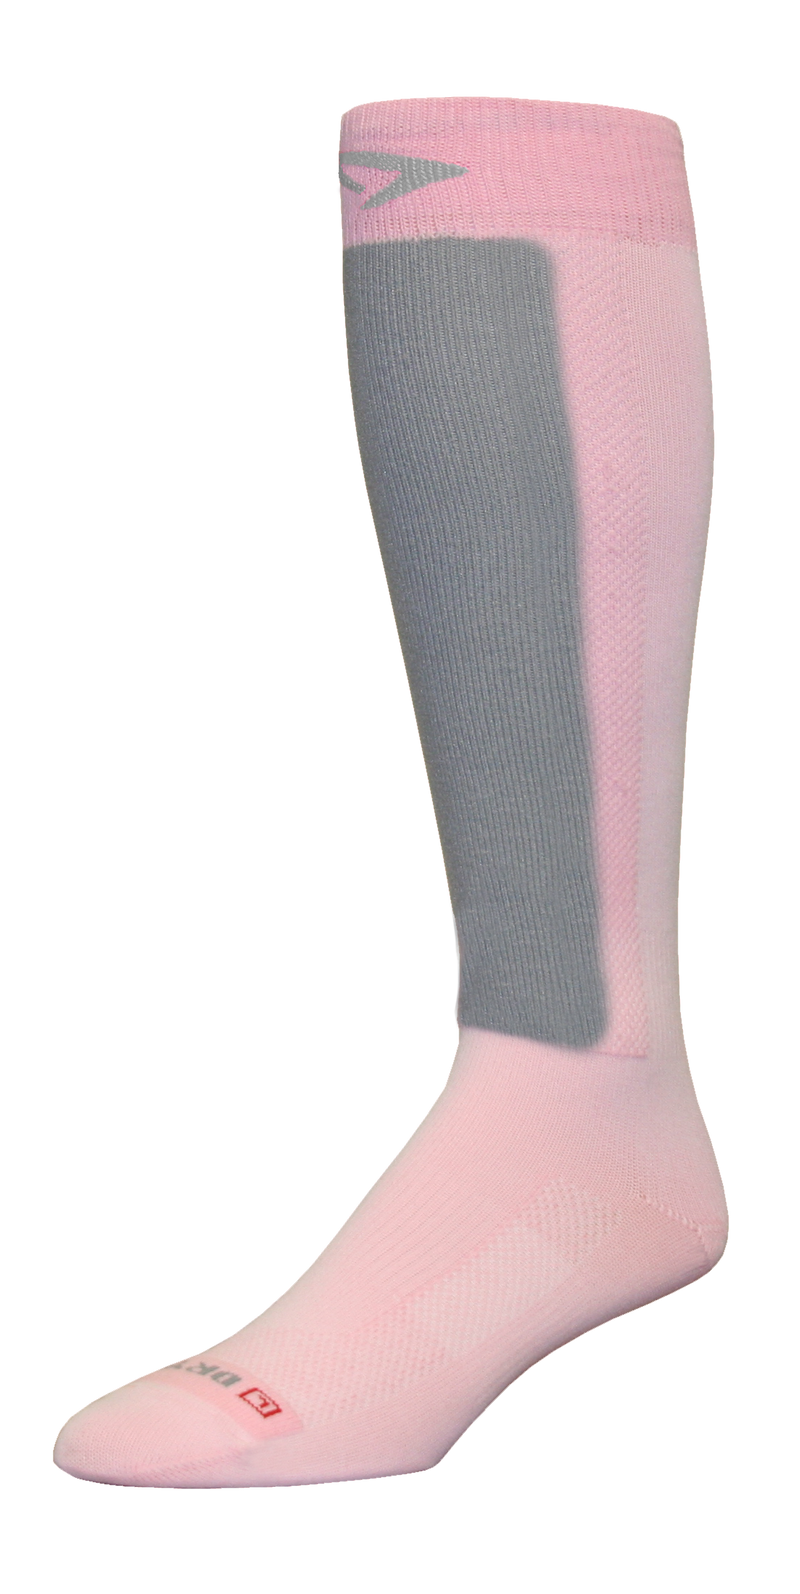 Ultra Thin Skiing Sock Over the Calf -  Pink / Lite Gray - DISCONTINUED